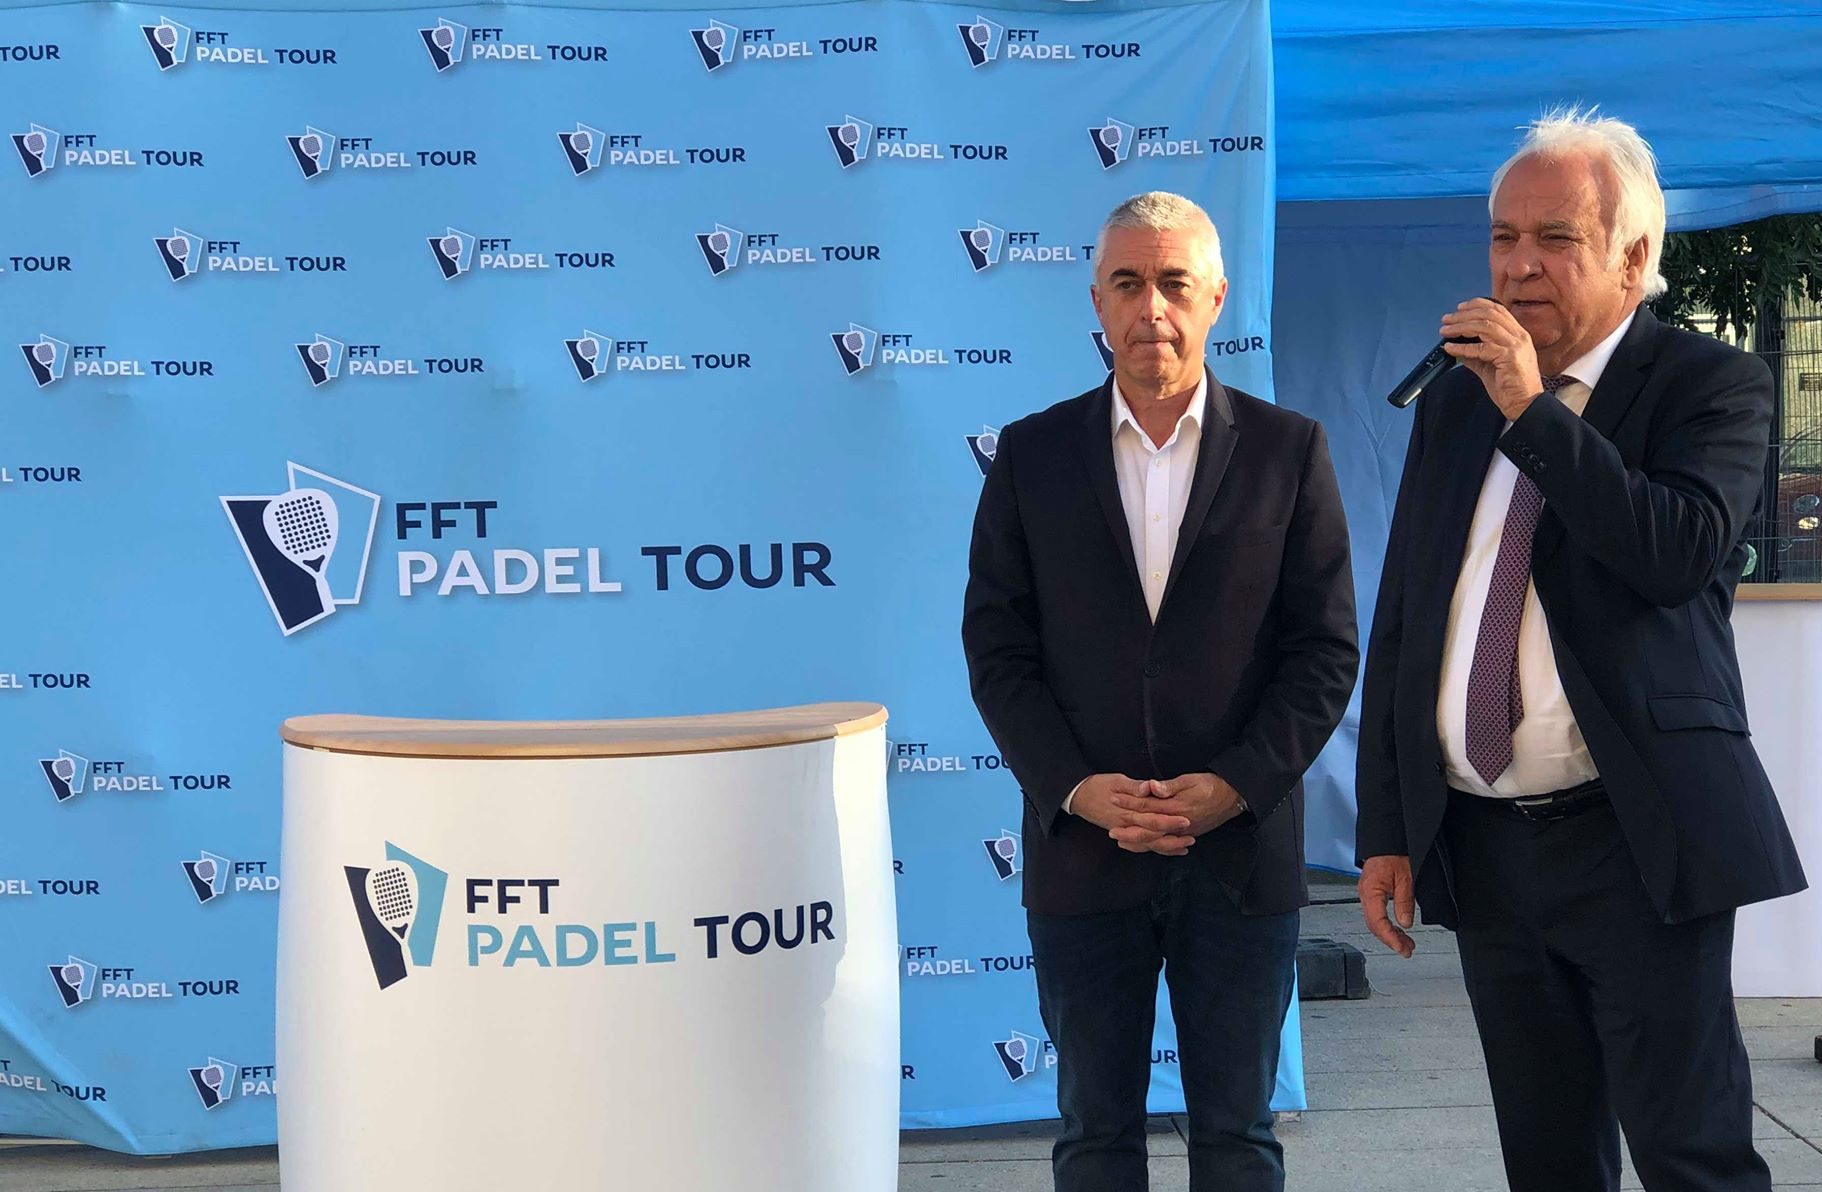 Hubert Picquier: “A unique year 2020 for the padel"